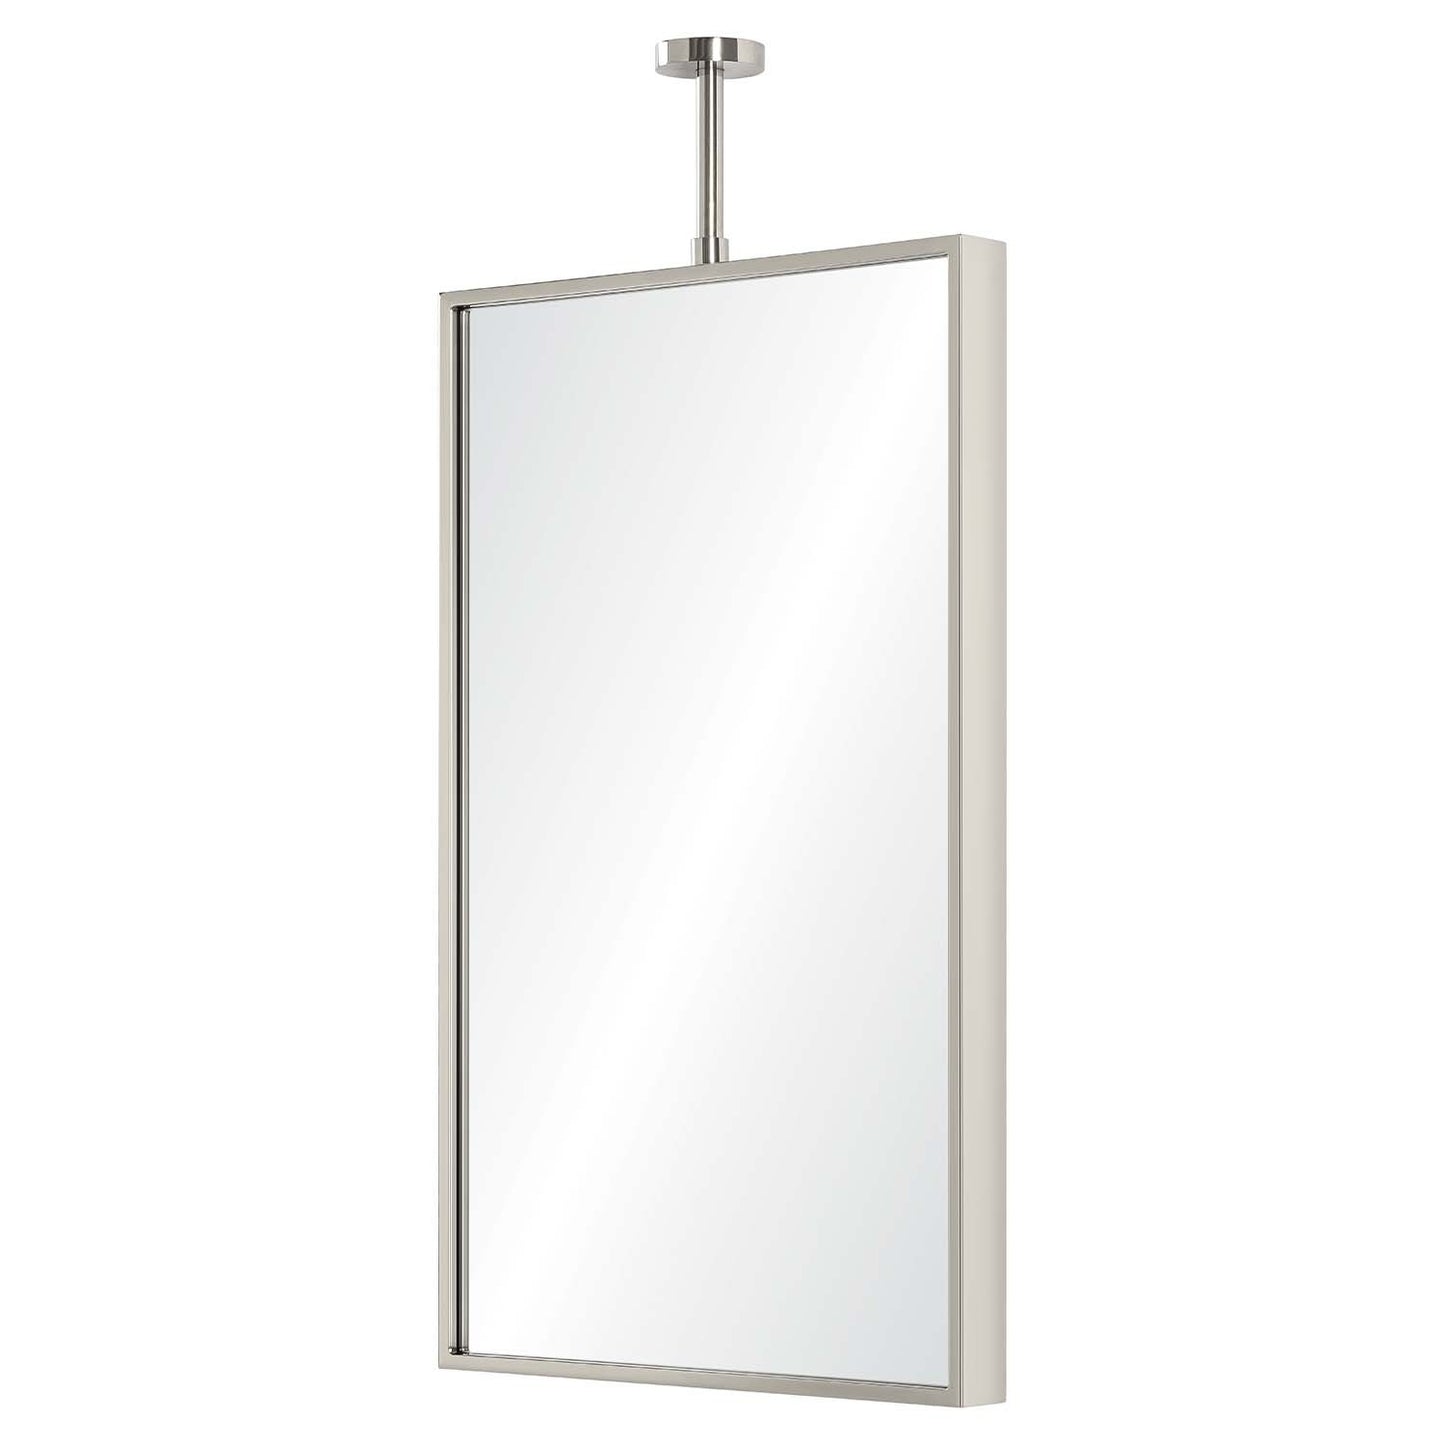 mirror home ceiling mount mirror polished stainless steel angle